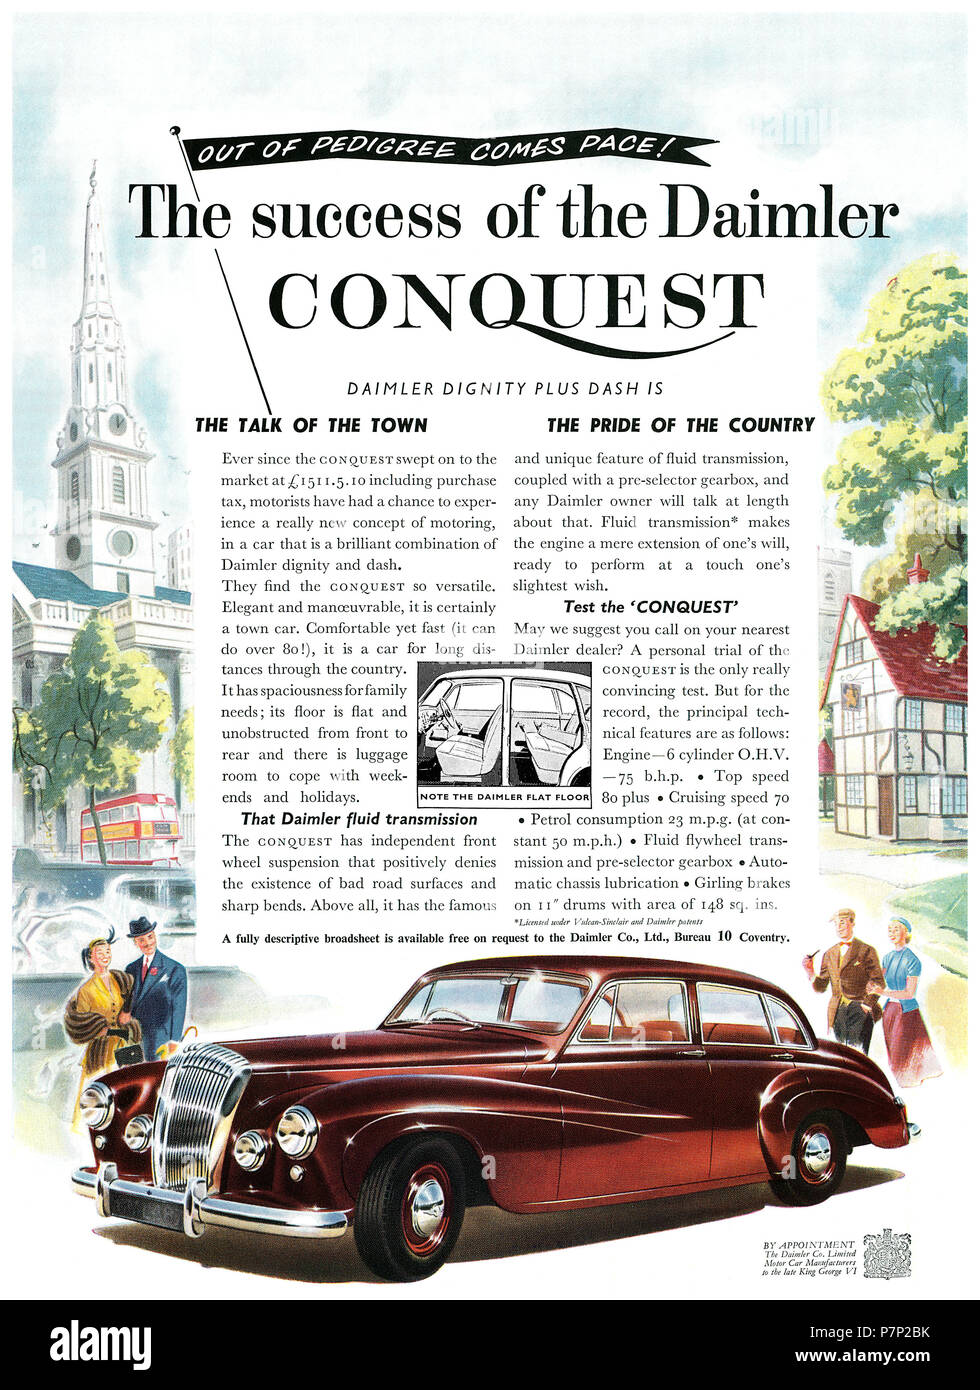 1953 British advertisement for the Daimler Conquest motor car. Stock Photo